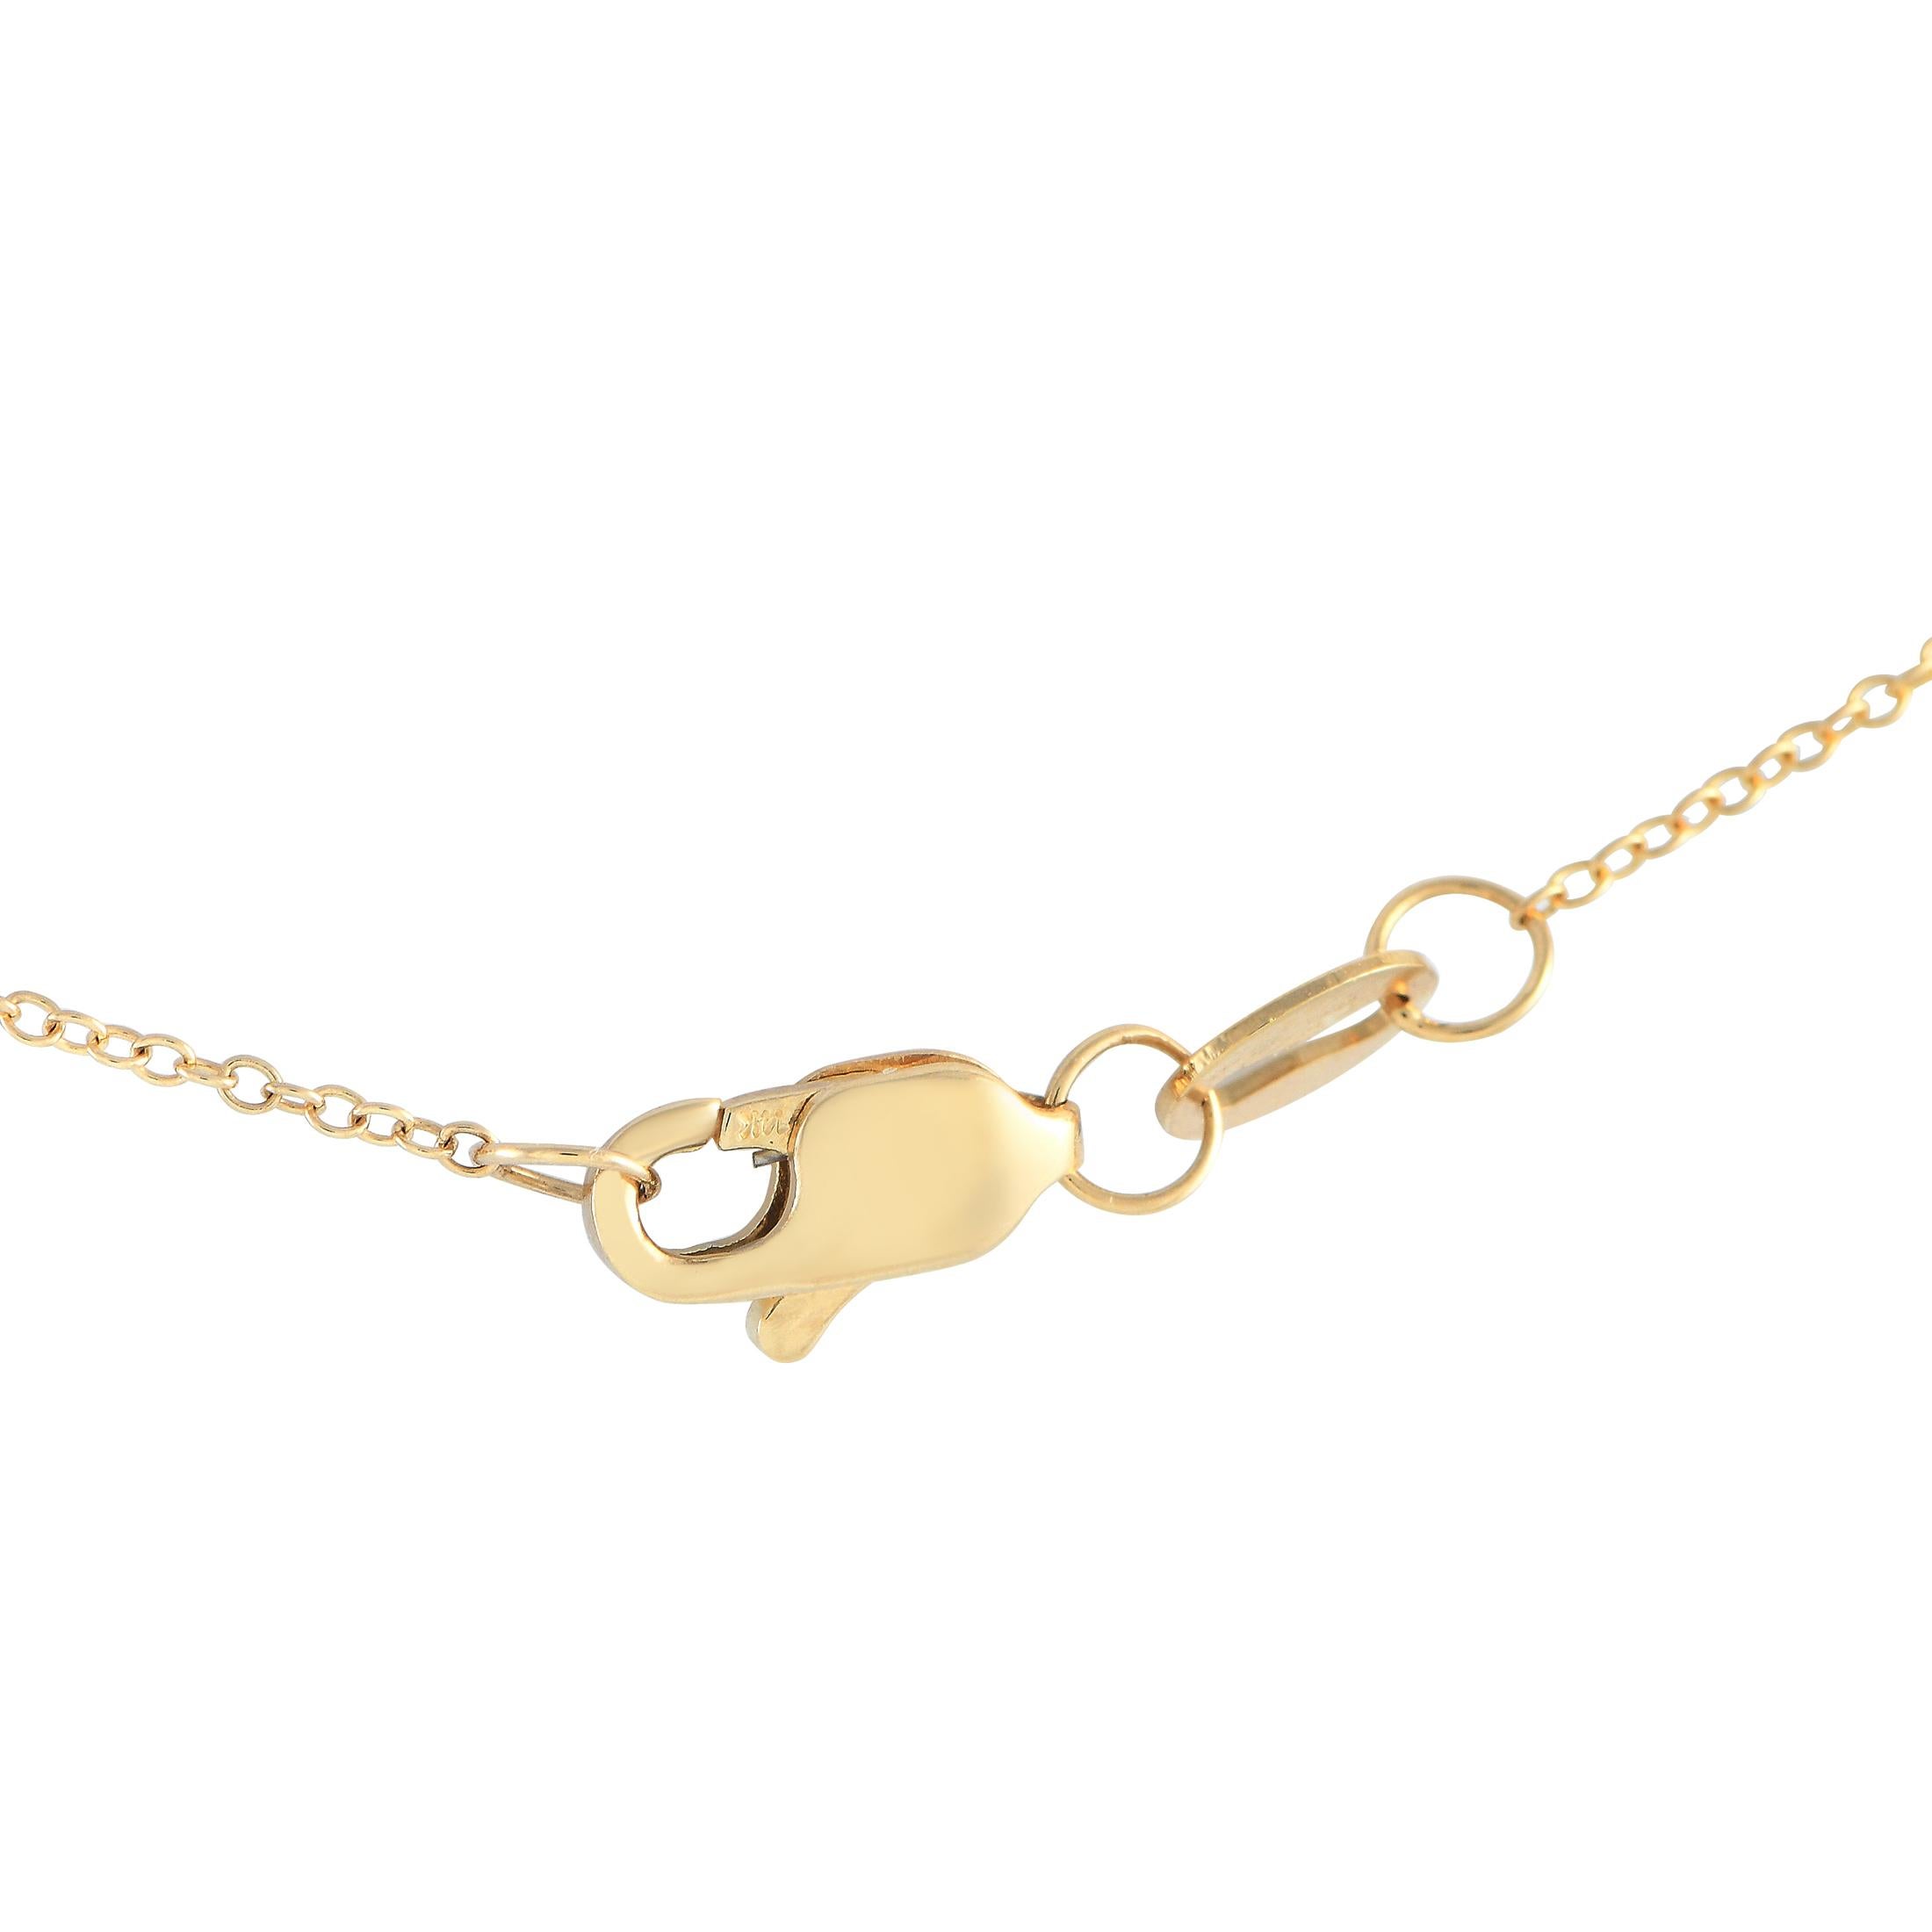 Simple yet detailed, this yellow gold necklace is able to display class and elegance without being flashy. It features a delicate 14K yellow gold cable chain with a lobster clasp and a round pendant. A combination of round and step-cut diamonds